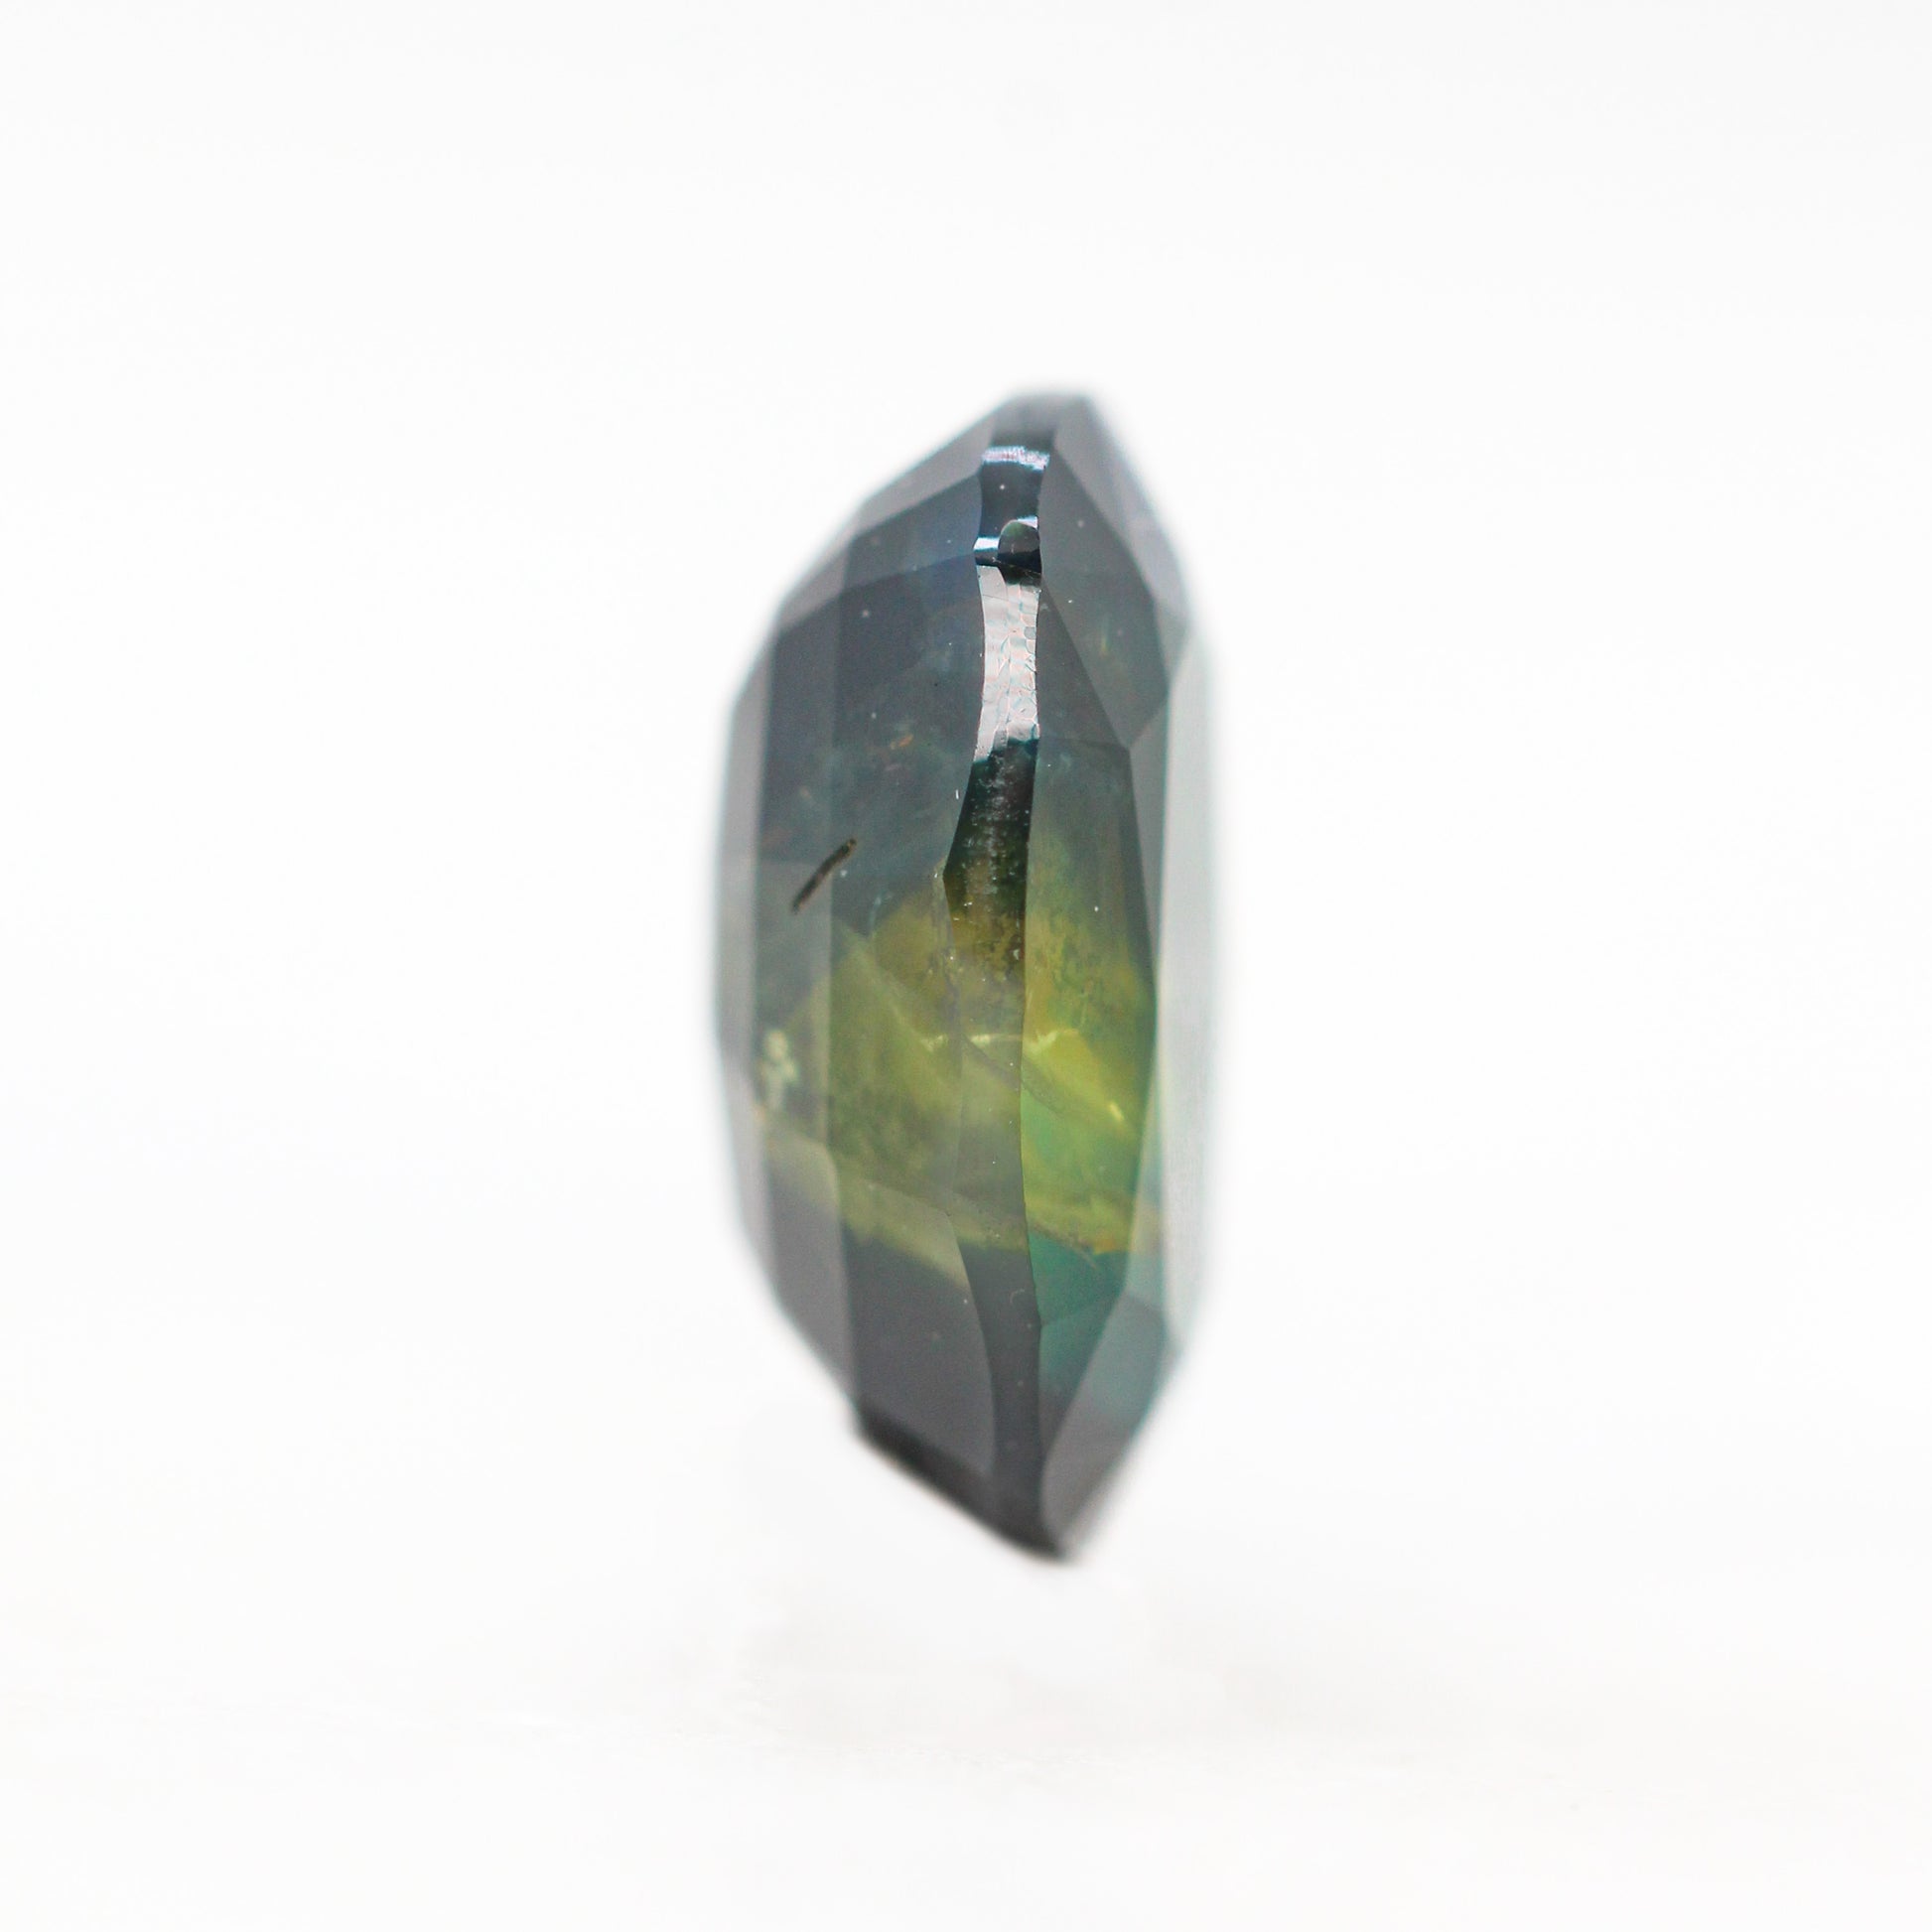 3.50 Carat Yellow-Green Oval Sapphire for Custom Work - Inventory Code YGOS350 - Midwinter Co. Alternative Bridal Rings and Modern Fine Jewelry